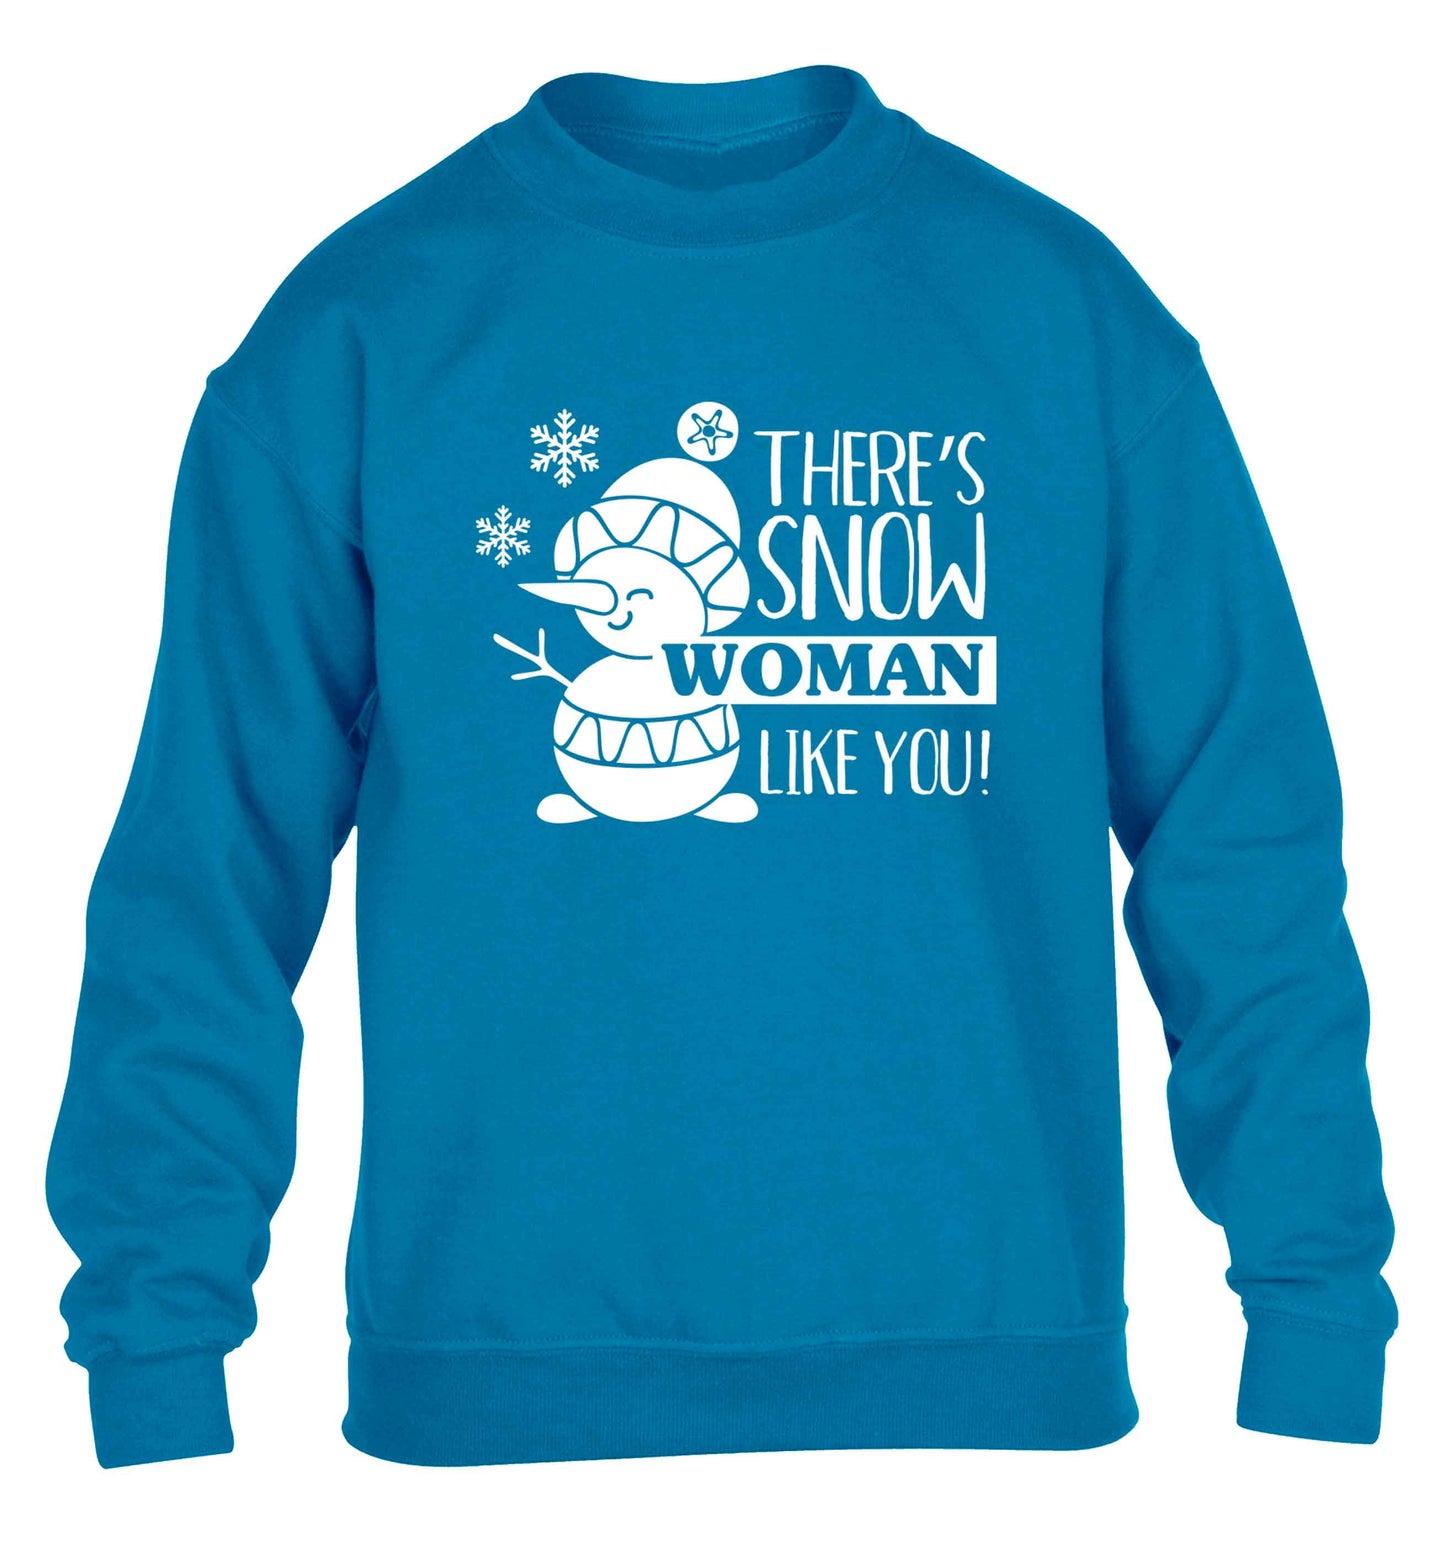 There's snow woman like you children's blue sweater 12-13 Years